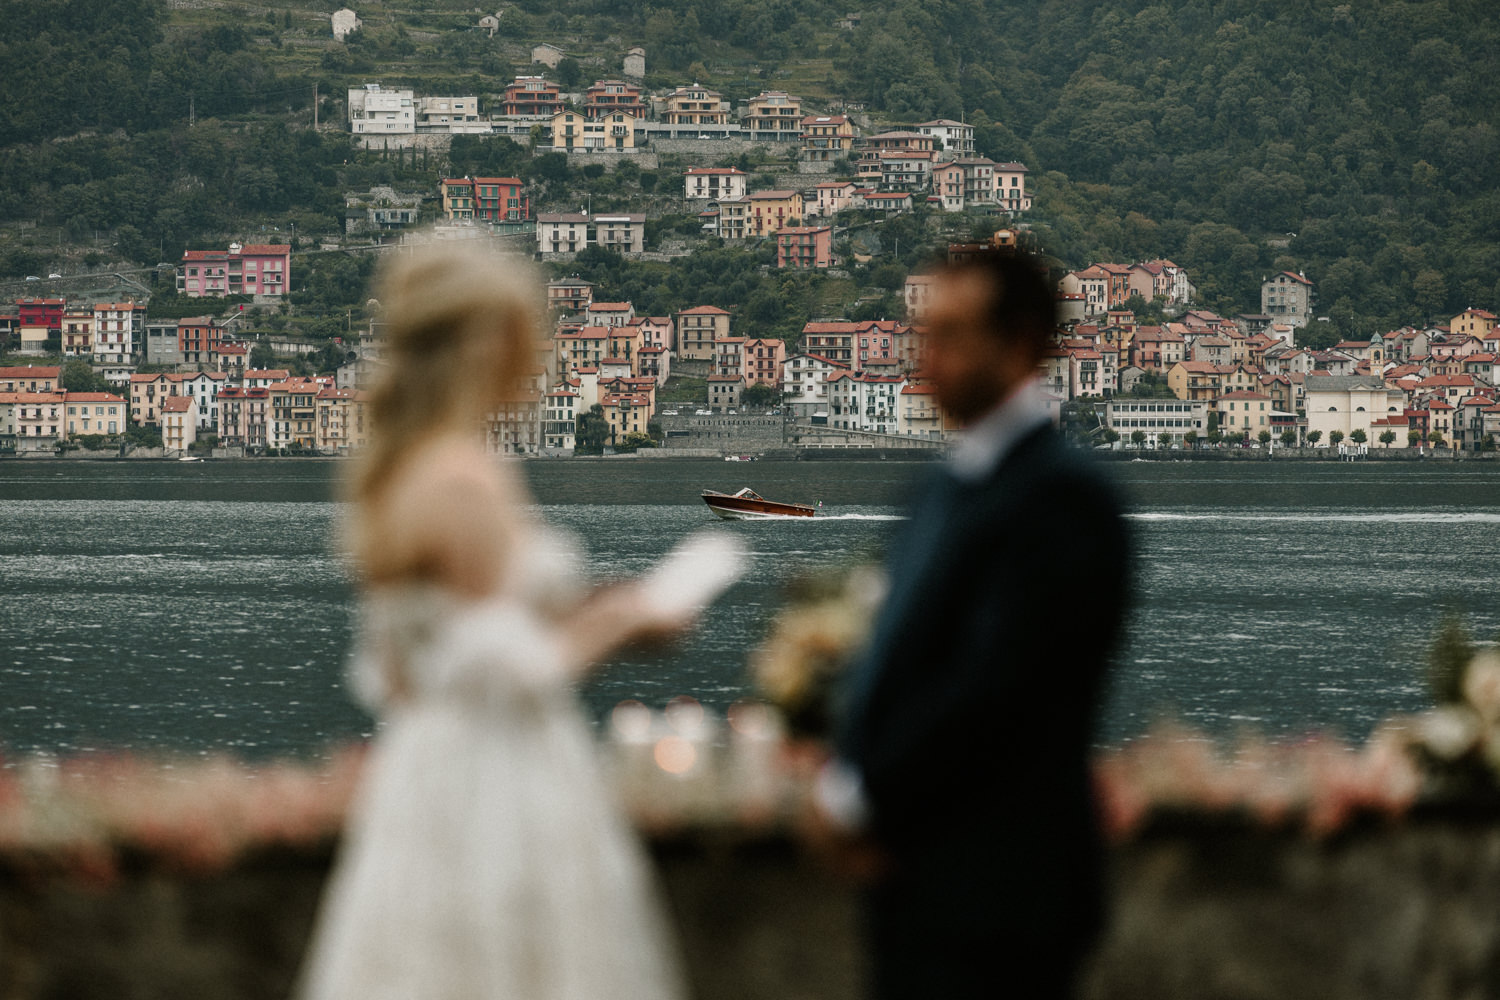 A couple stands out of focus reading wedding vows on the day they elope near Lake Como, Italy. There is a boat in focus on the lake between them, with colorful homes on the hills behind them.